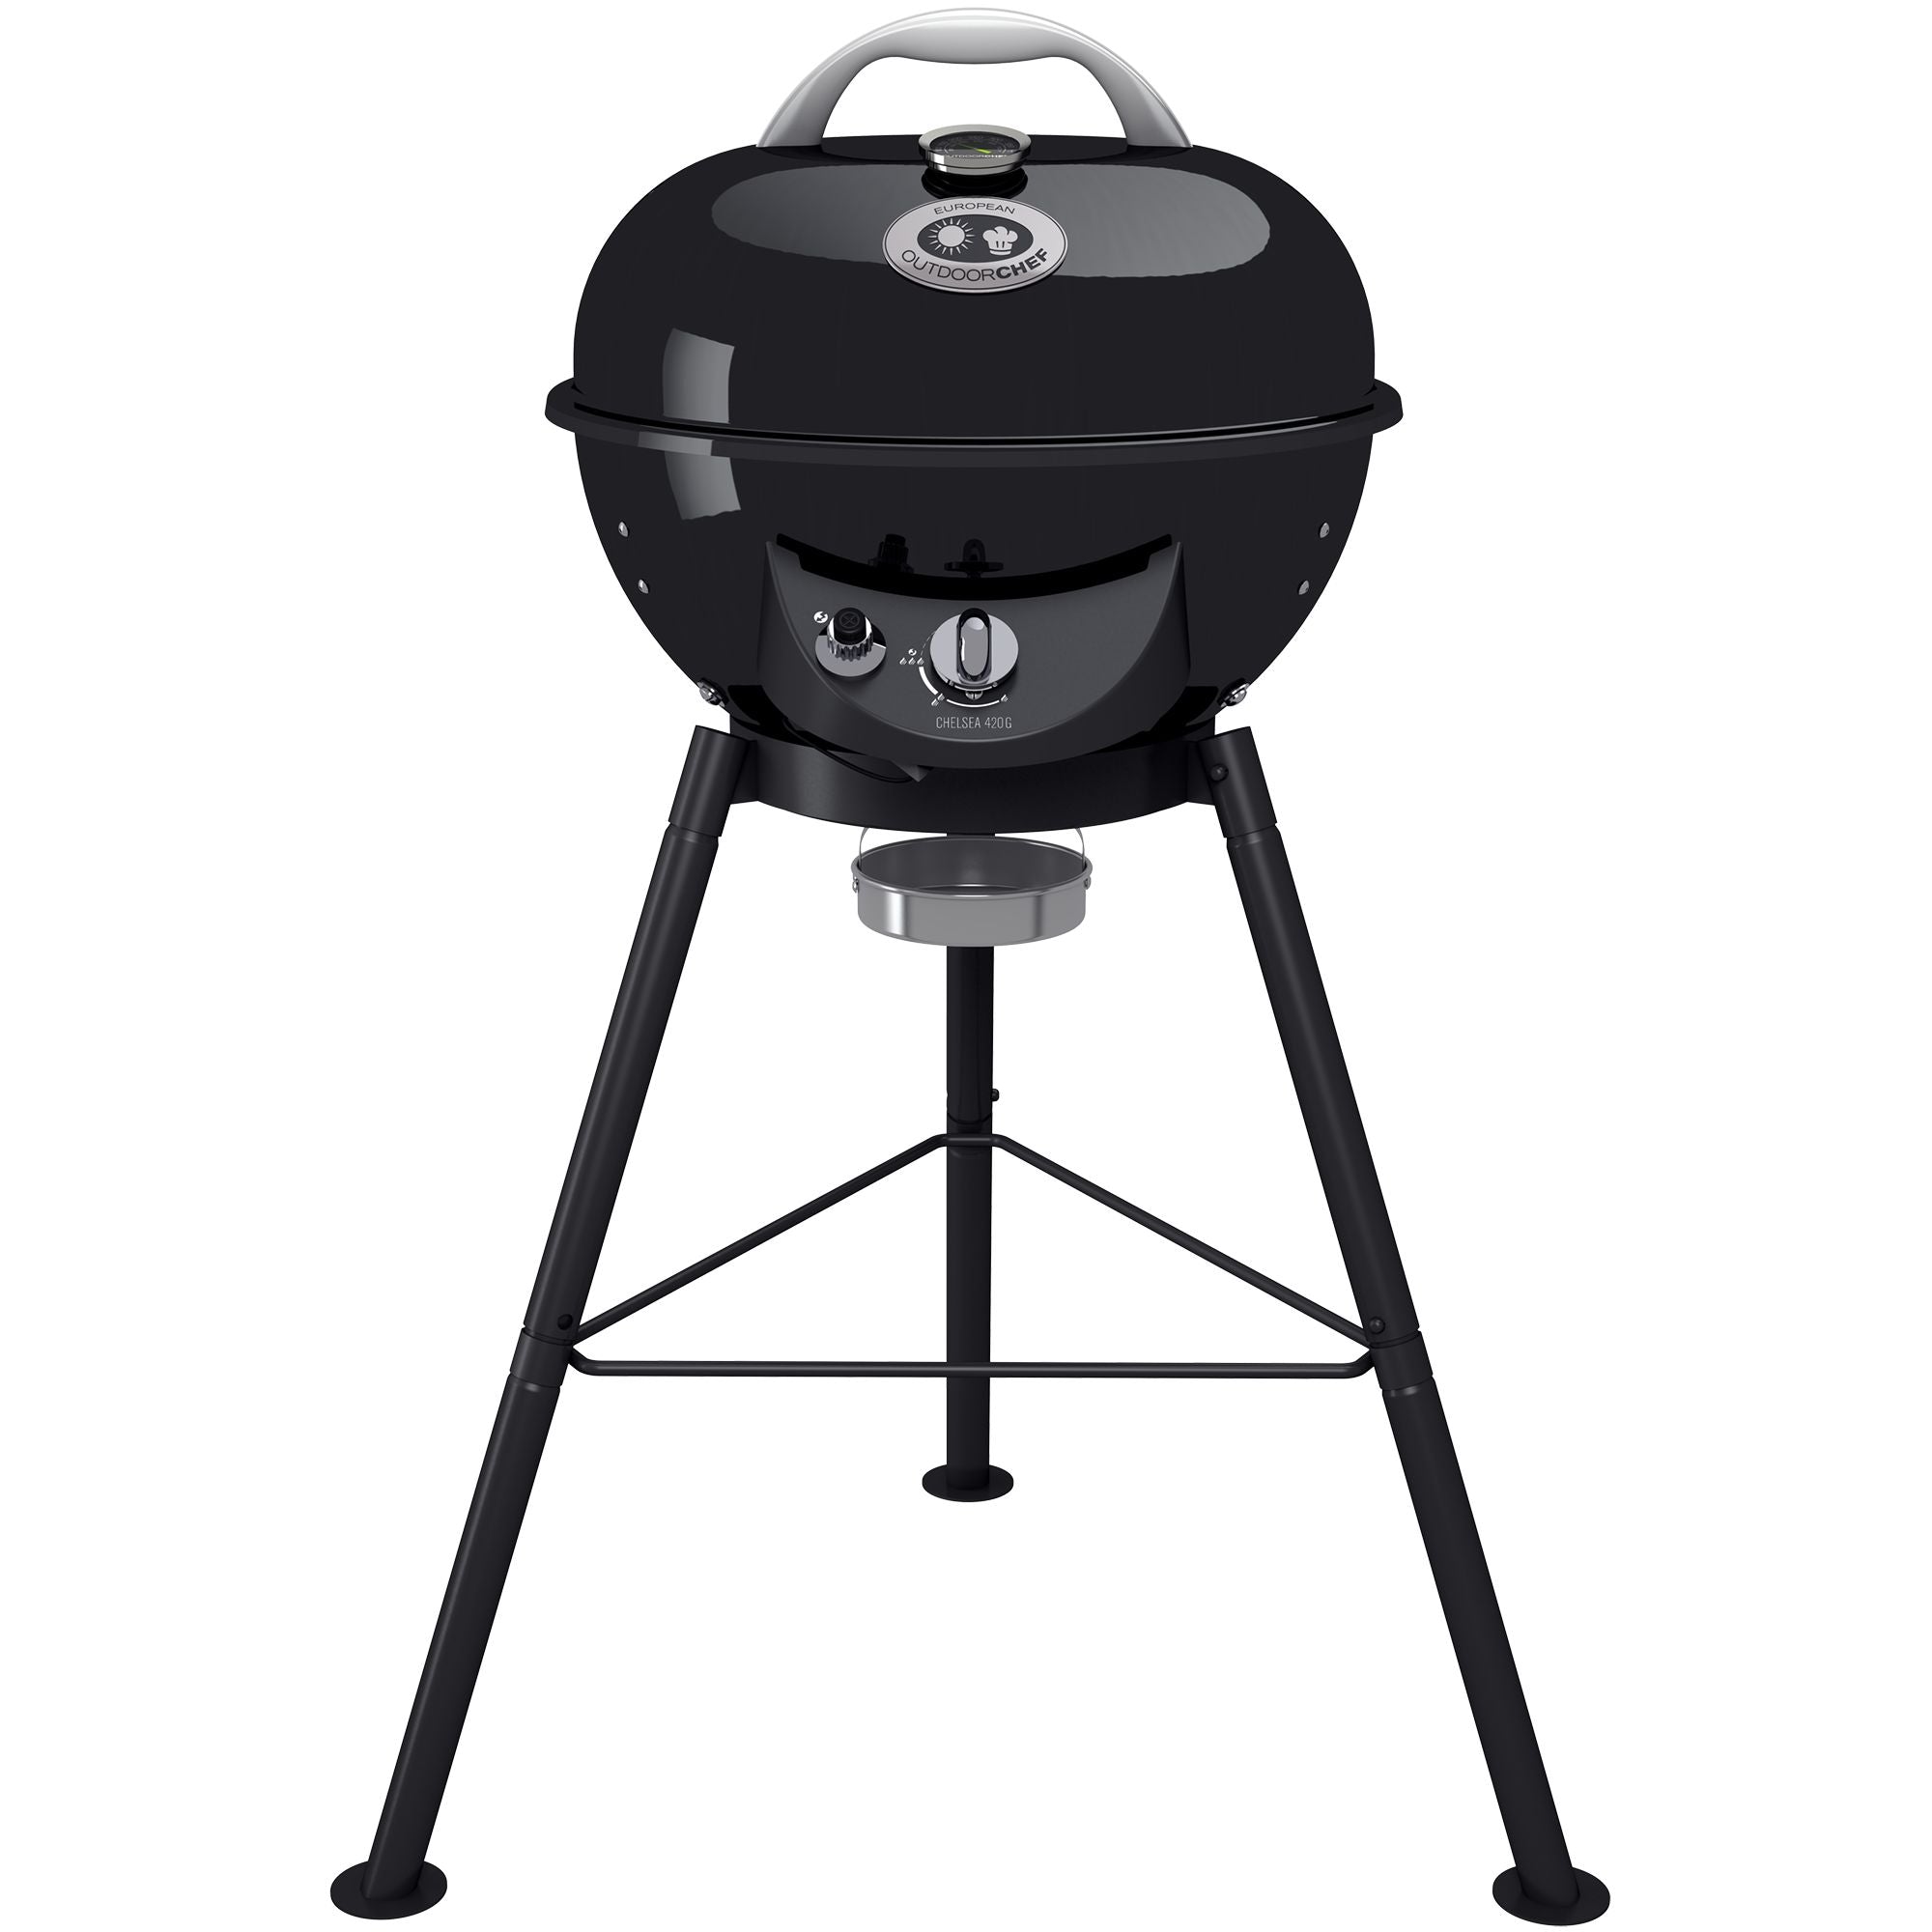 Outdoor Chef Chelsea 420 Gas Kettle Barbecue-BBQ-Outdoor Chef-QQ086001-18.128.27- DC Leisure